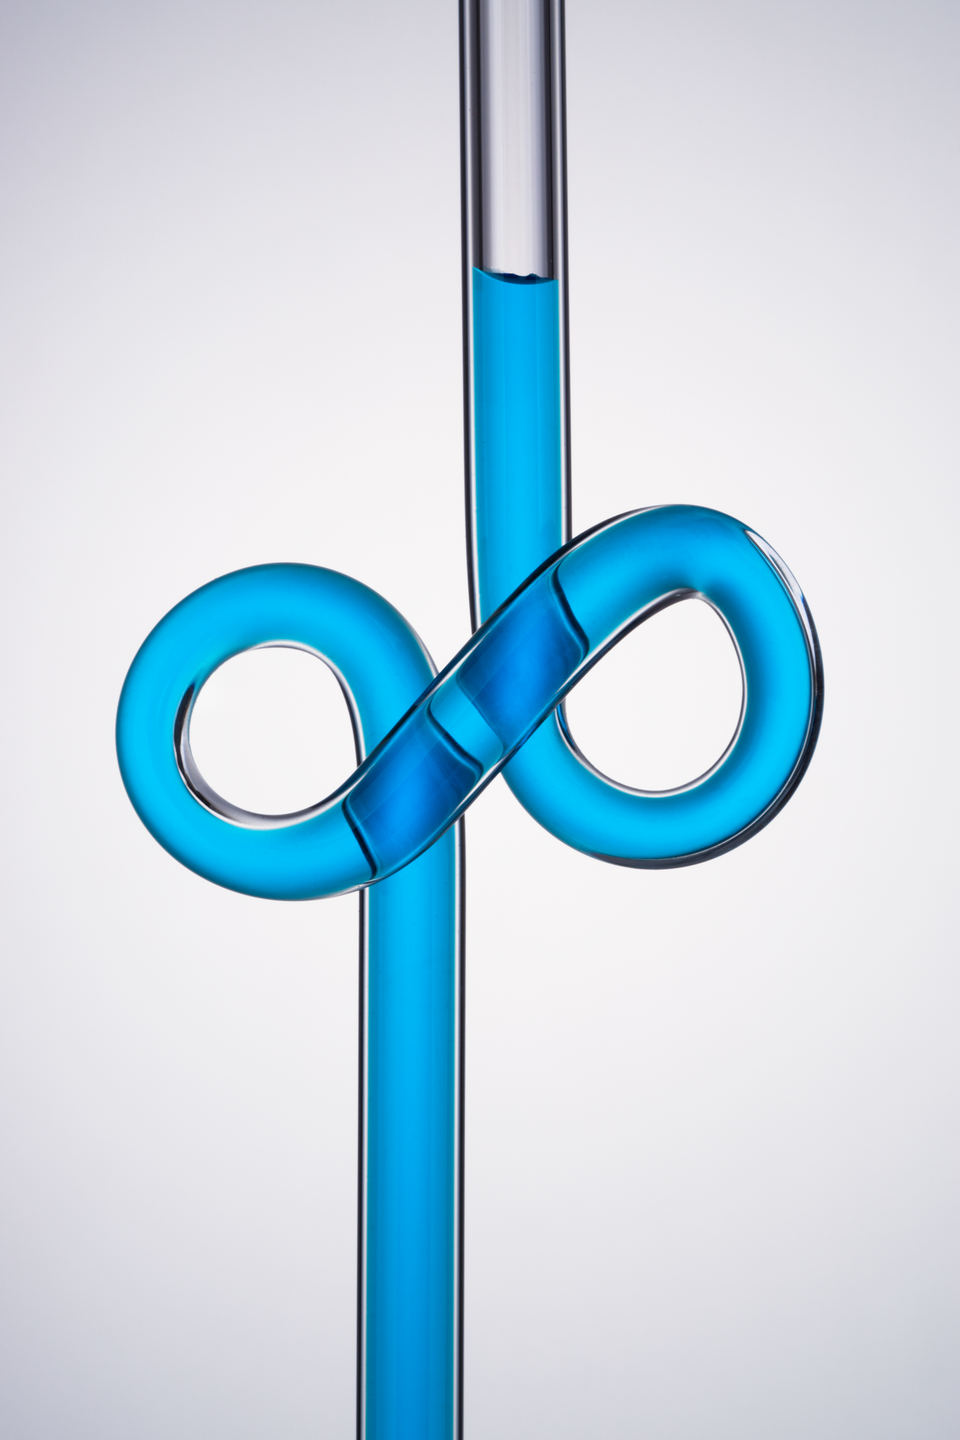 infinity symbol shaped glass tube with blue liquid on white background